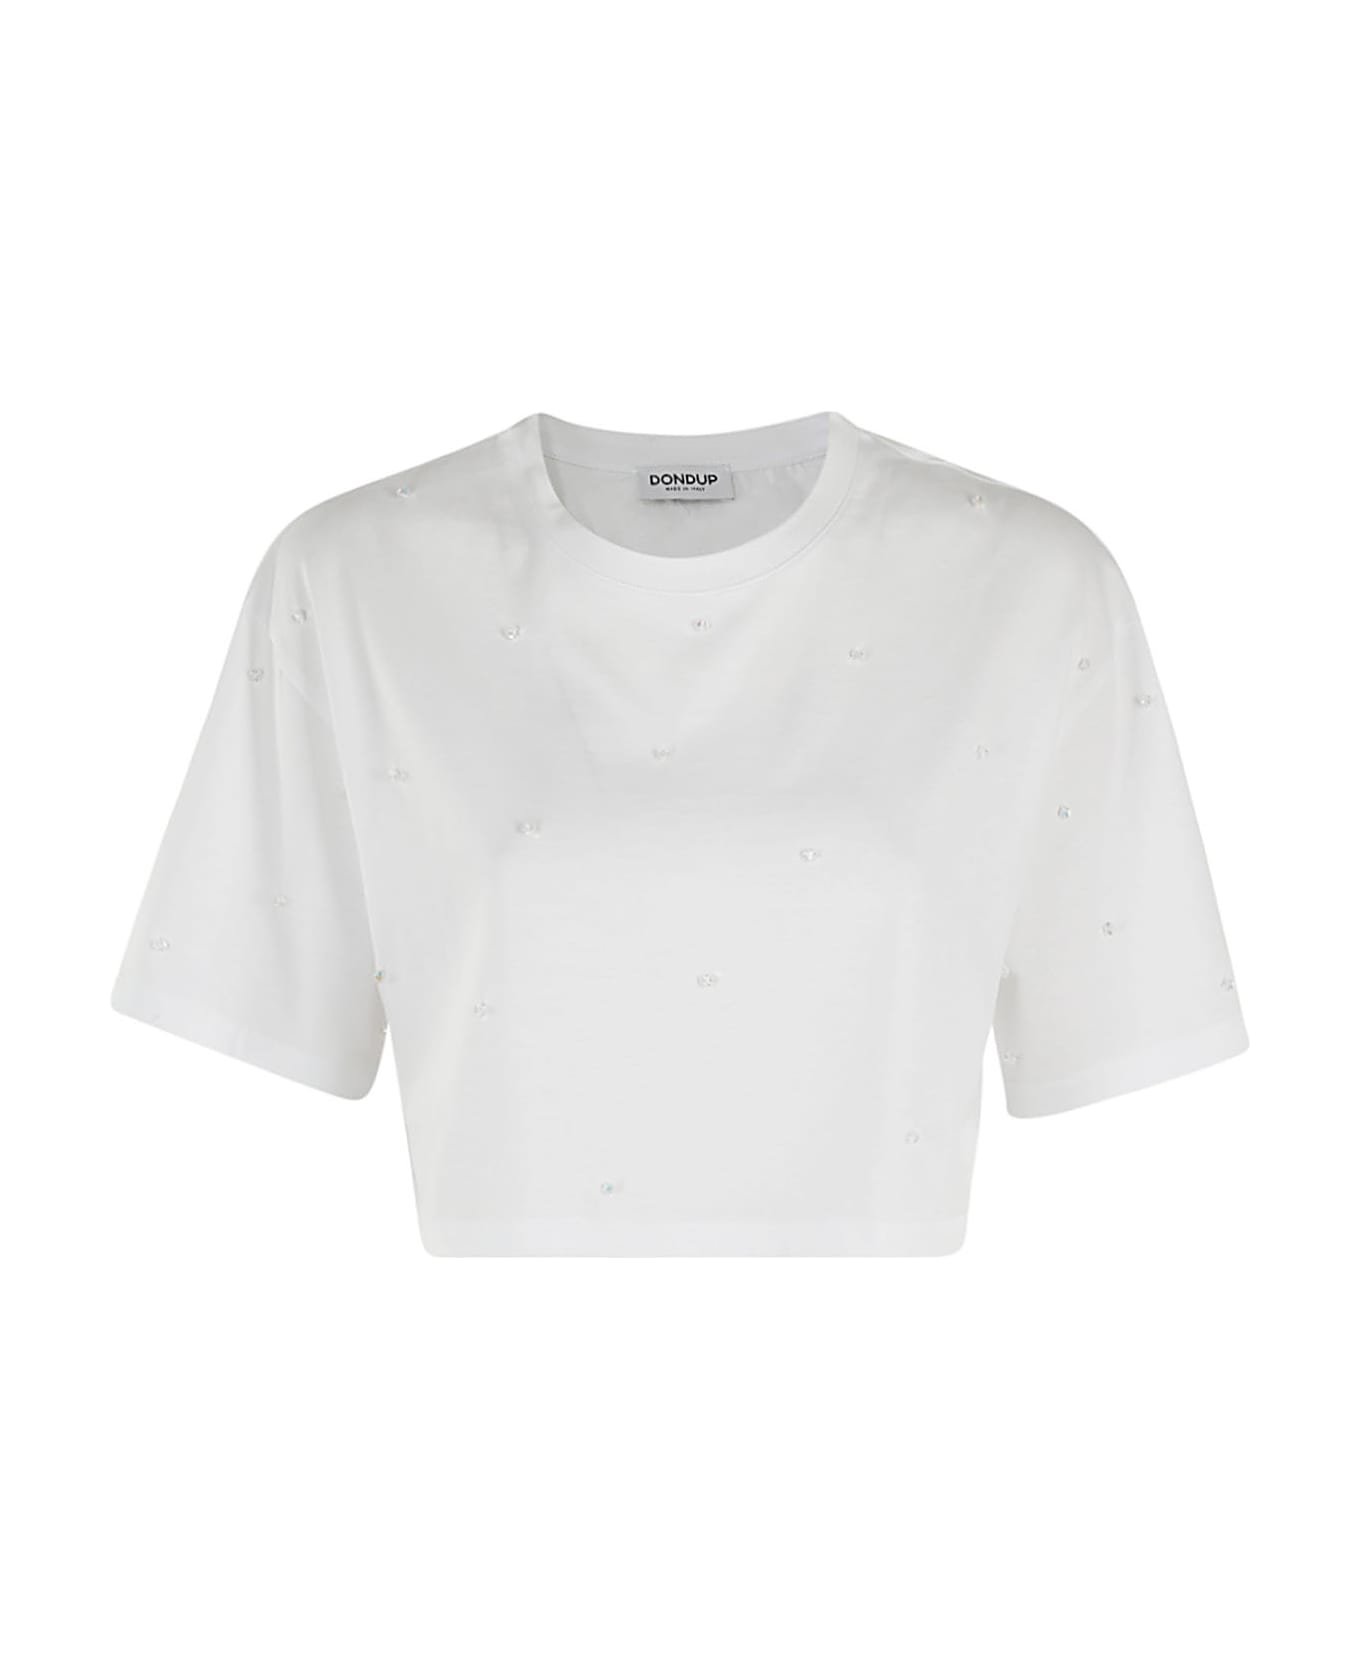 Dondup Cropped T-shirt Tシャツ